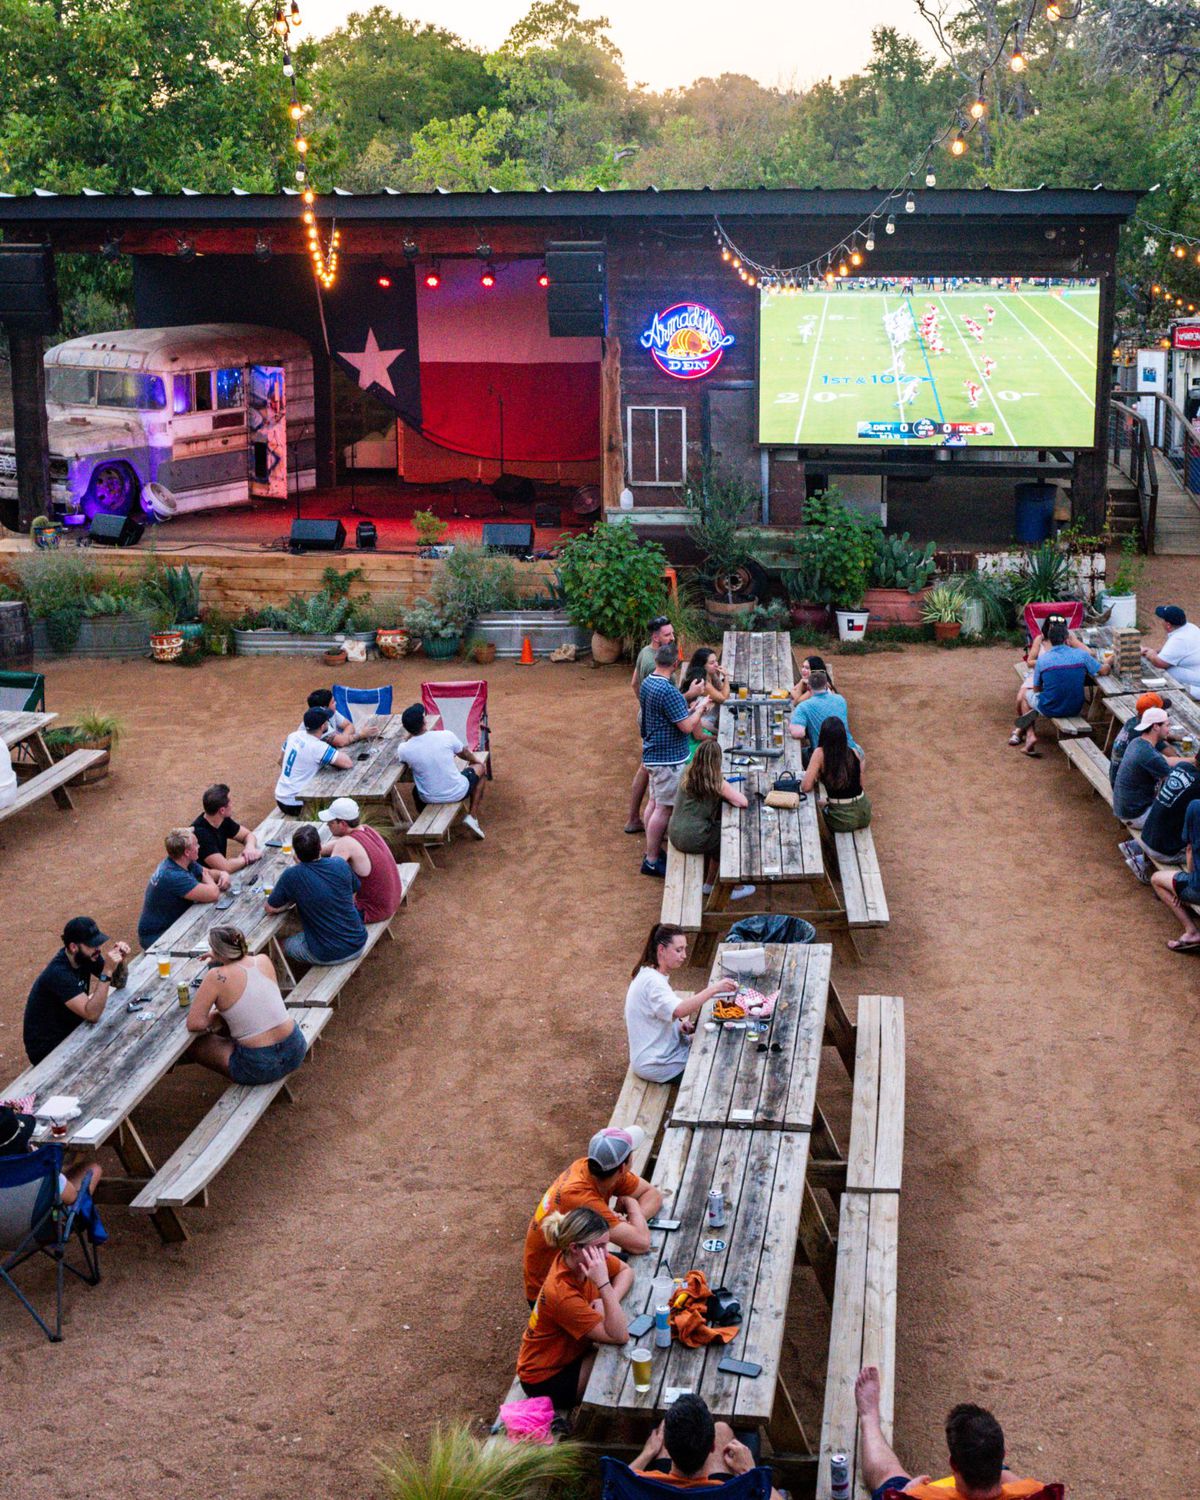 A restaurant patio with a screen showing a football game.